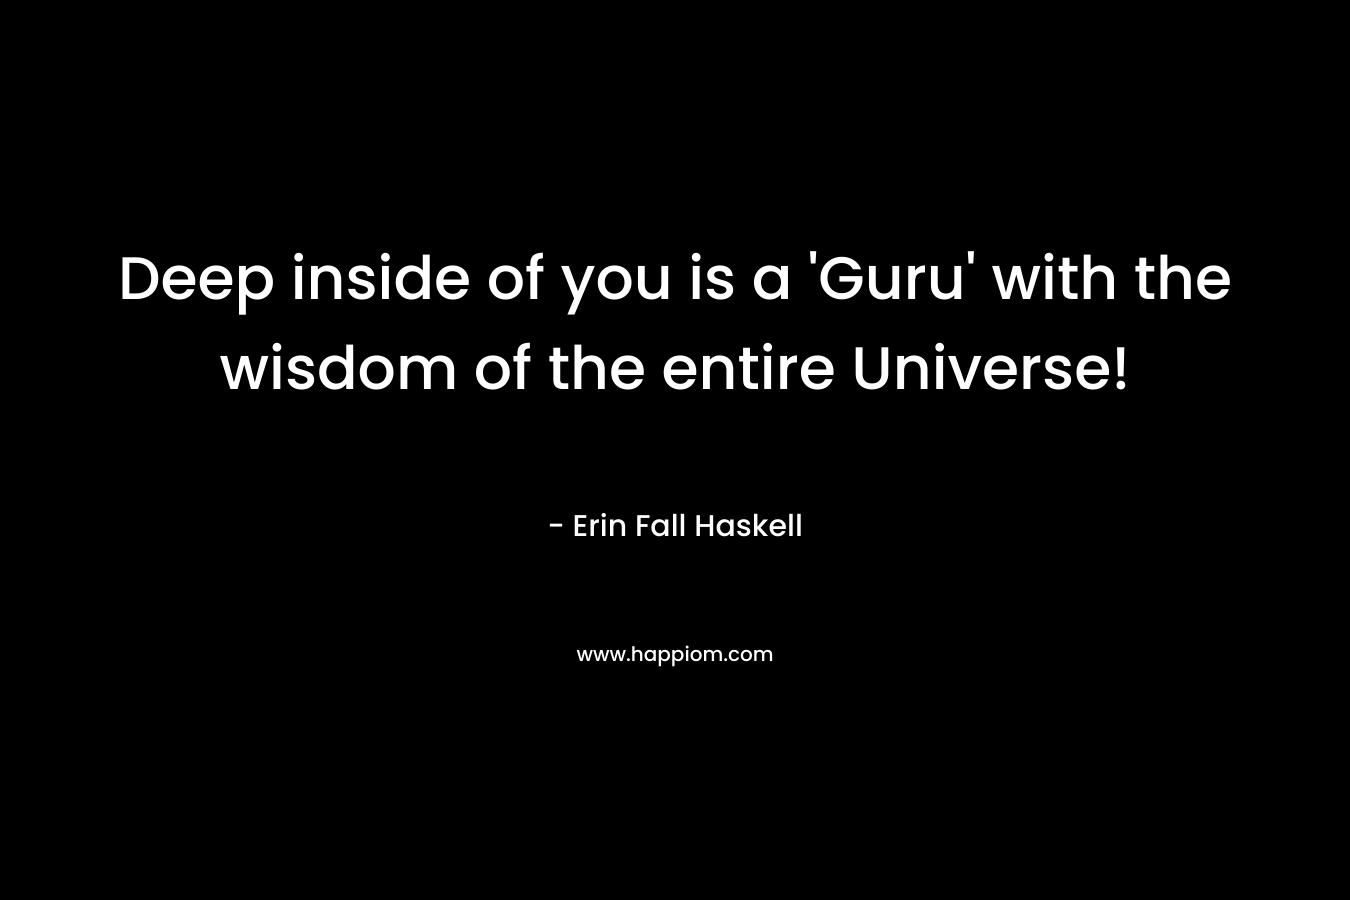 Deep inside of you is a 'Guru' with the wisdom of the entire Universe!